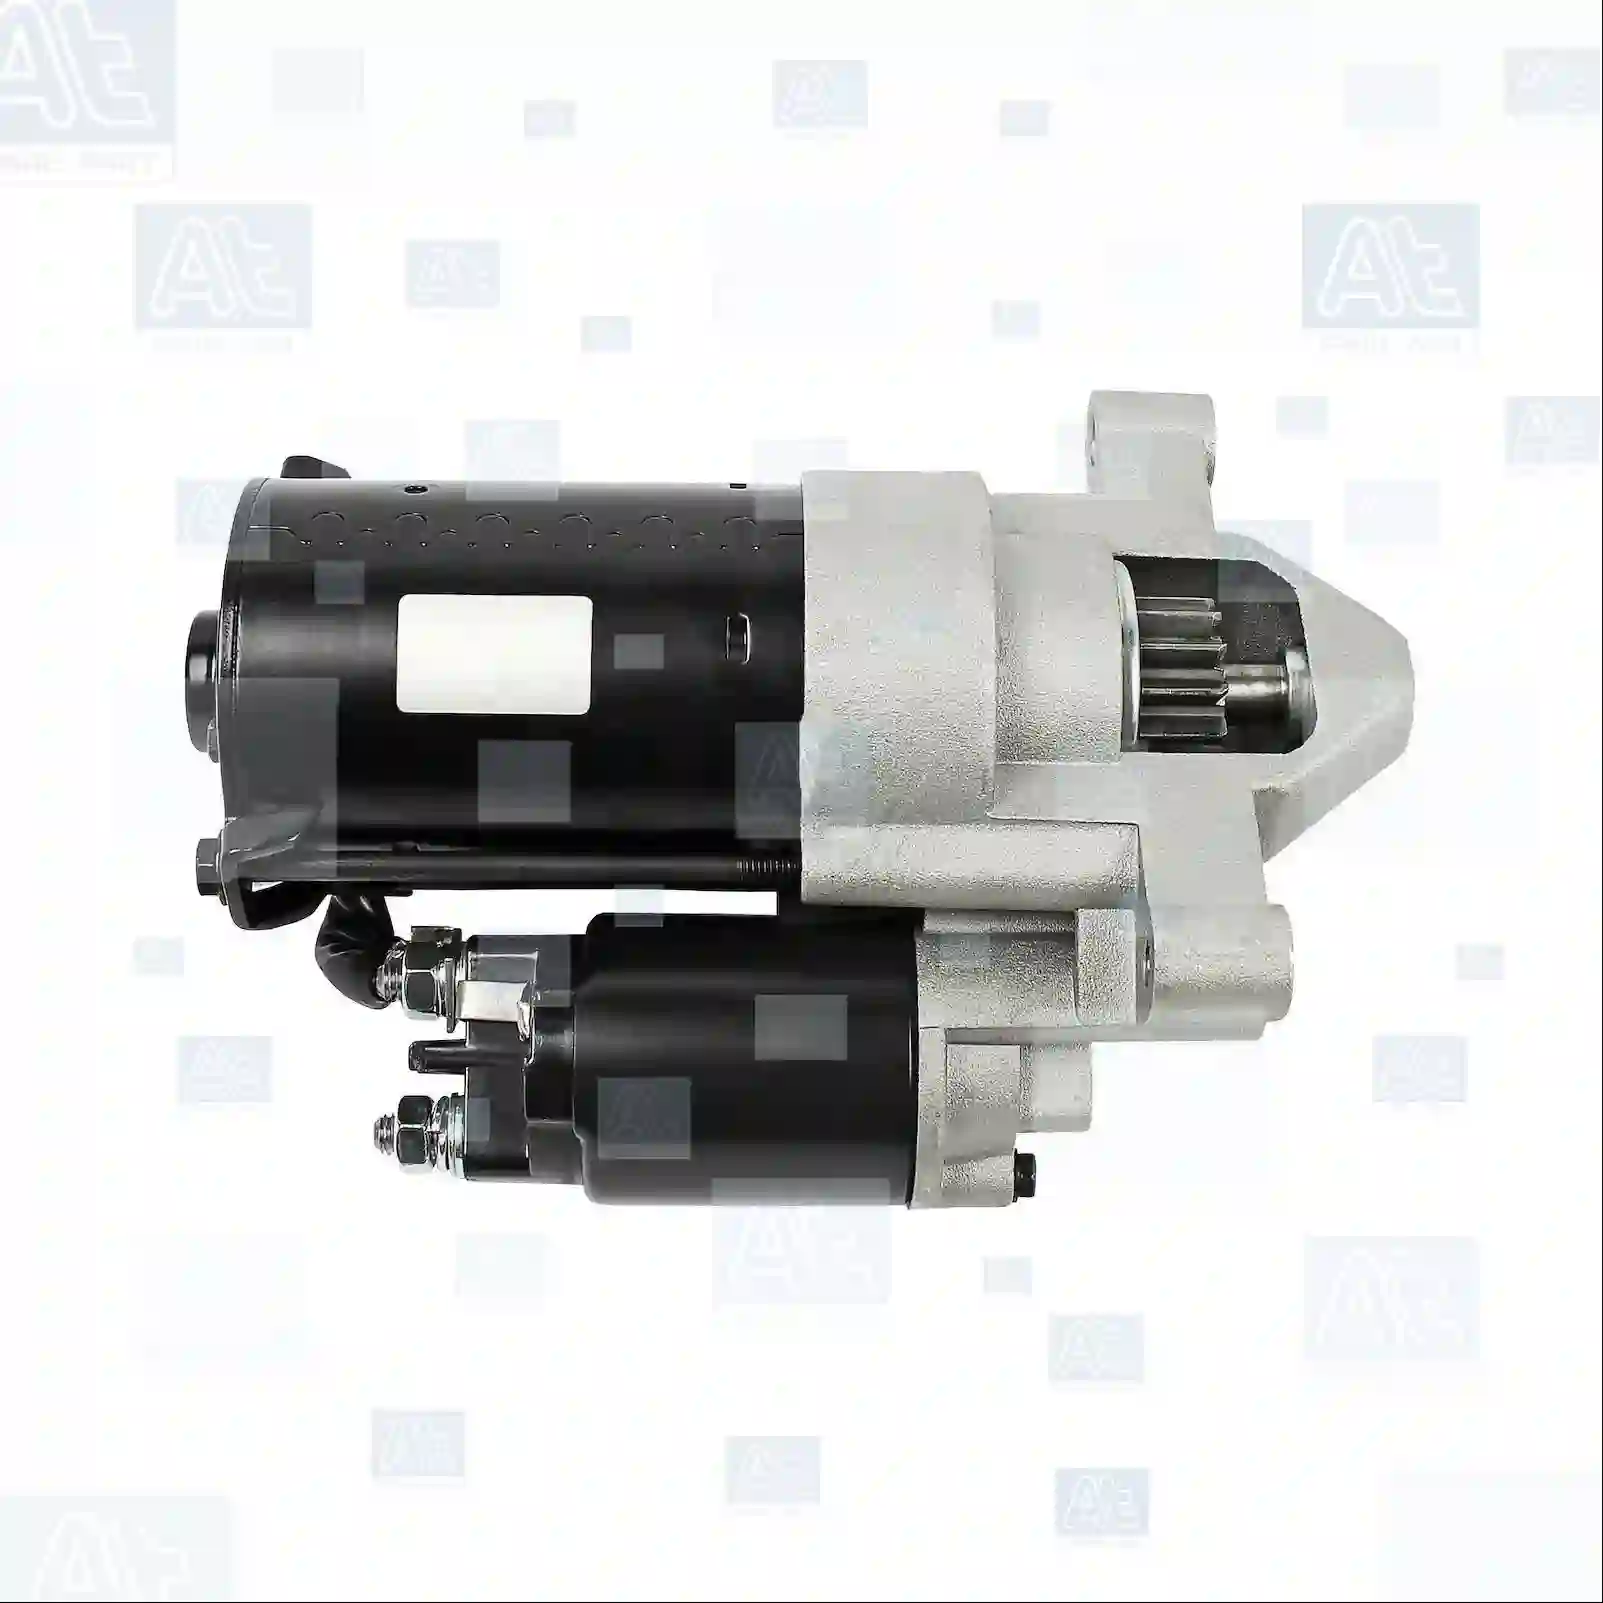 Starter Motor Starter, at no: 77710008 ,  oem no:71723361, 71782363, 71785217, 71785219, 96253825, 96293326, 19D10239SC, 5802CW, 5802CX, 5802CY, 5802E8, 5802FJ, 5802LH, 5802M3, 5802M7, 5802S3, 5802V5, 5802V7, 5802V8, 5802W1, 5802W2, 5802W3, 5802W4, 5802W5, 5802W8, 5802W9, 582036, 9101009880, 9623582580, 9625169780, 9625382580, 9625382680, 9625382780, 9625383080, 9631520480, 9648111680, 9656262780, 9656299480, 9656317680, 9671014680, 1516779, 1320921080, 1332419080, 1342792080, 71716562, 71716563, 71716564, 71716565, 71719595, 71719600, 71719601, 71719604, 71719608, 71719609, 71728811, 71782363, 9603503580, 9624291480, 9625382680, 9625382780, 1342792080, 717738330, 71716562, 71716563, 71716565, 71716595, 71716598, 71716599, 71716604, 71716605, 71716606, 71719600, 71719607, 71719608, 71719609, 71723361, 71723362, 71728811, 71738330, 71782363, 71782364, 71782400, 71785217, 71785219, 71794326, 9625168580, 9625382580, 9625382680, 9625383080, 9656262780, 9656299480, 96035035, 1320921080, 1332419080, 36100-29000, 1320921080, 1332419080, 1342792080, 71716562, 71716563, 71716564, 71716565, 71719595, 71719600, 71719601, 71719608, 71719609, 71722374, 71723361, 71728811, 71782363, 71785217, 71785219, 71794326, 9624291480, 9625168580, 9625382580, 9625382680, 9625382780, 9670983080, SS157, 943251127, 943251144, 19D10239SC, 5802CW, 5802CX, 5802CY, 5802E8, 5802FJ, 5802LH, 5802M3, 5802M7, 5802S3, 5802V5, 5802V7, 5802V8, 5802W1, 5802W2, 5802W3, 5802W4, 5802W5, 5802W8, 5802W9, 582036, 9101009880, 9623582580, 9625169780, 9625382580, 9625382680, 9625382780, 9625383080, 9631520480, 9648111680, 9656262780, 9656299480, 9656317680, 9671014680, 31100-86CB1 At Spare Part | Engine, Accelerator Pedal, Camshaft, Connecting Rod, Crankcase, Crankshaft, Cylinder Head, Engine Suspension Mountings, Exhaust Manifold, Exhaust Gas Recirculation, Filter Kits, Flywheel Housing, General Overhaul Kits, Engine, Intake Manifold, Oil Cleaner, Oil Cooler, Oil Filter, Oil Pump, Oil Sump, Piston & Liner, Sensor & Switch, Timing Case, Turbocharger, Cooling System, Belt Tensioner, Coolant Filter, Coolant Pipe, Corrosion Prevention Agent, Drive, Expansion Tank, Fan, Intercooler, Monitors & Gauges, Radiator, Thermostat, V-Belt / Timing belt, Water Pump, Fuel System, Electronical Injector Unit, Feed Pump, Fuel Filter, cpl., Fuel Gauge Sender,  Fuel Line, Fuel Pump, Fuel Tank, Injection Line Kit, Injection Pump, Exhaust System, Clutch & Pedal, Gearbox, Propeller Shaft, Axles, Brake System, Hubs & Wheels, Suspension, Leaf Spring, Universal Parts / Accessories, Steering, Electrical System, Cabin